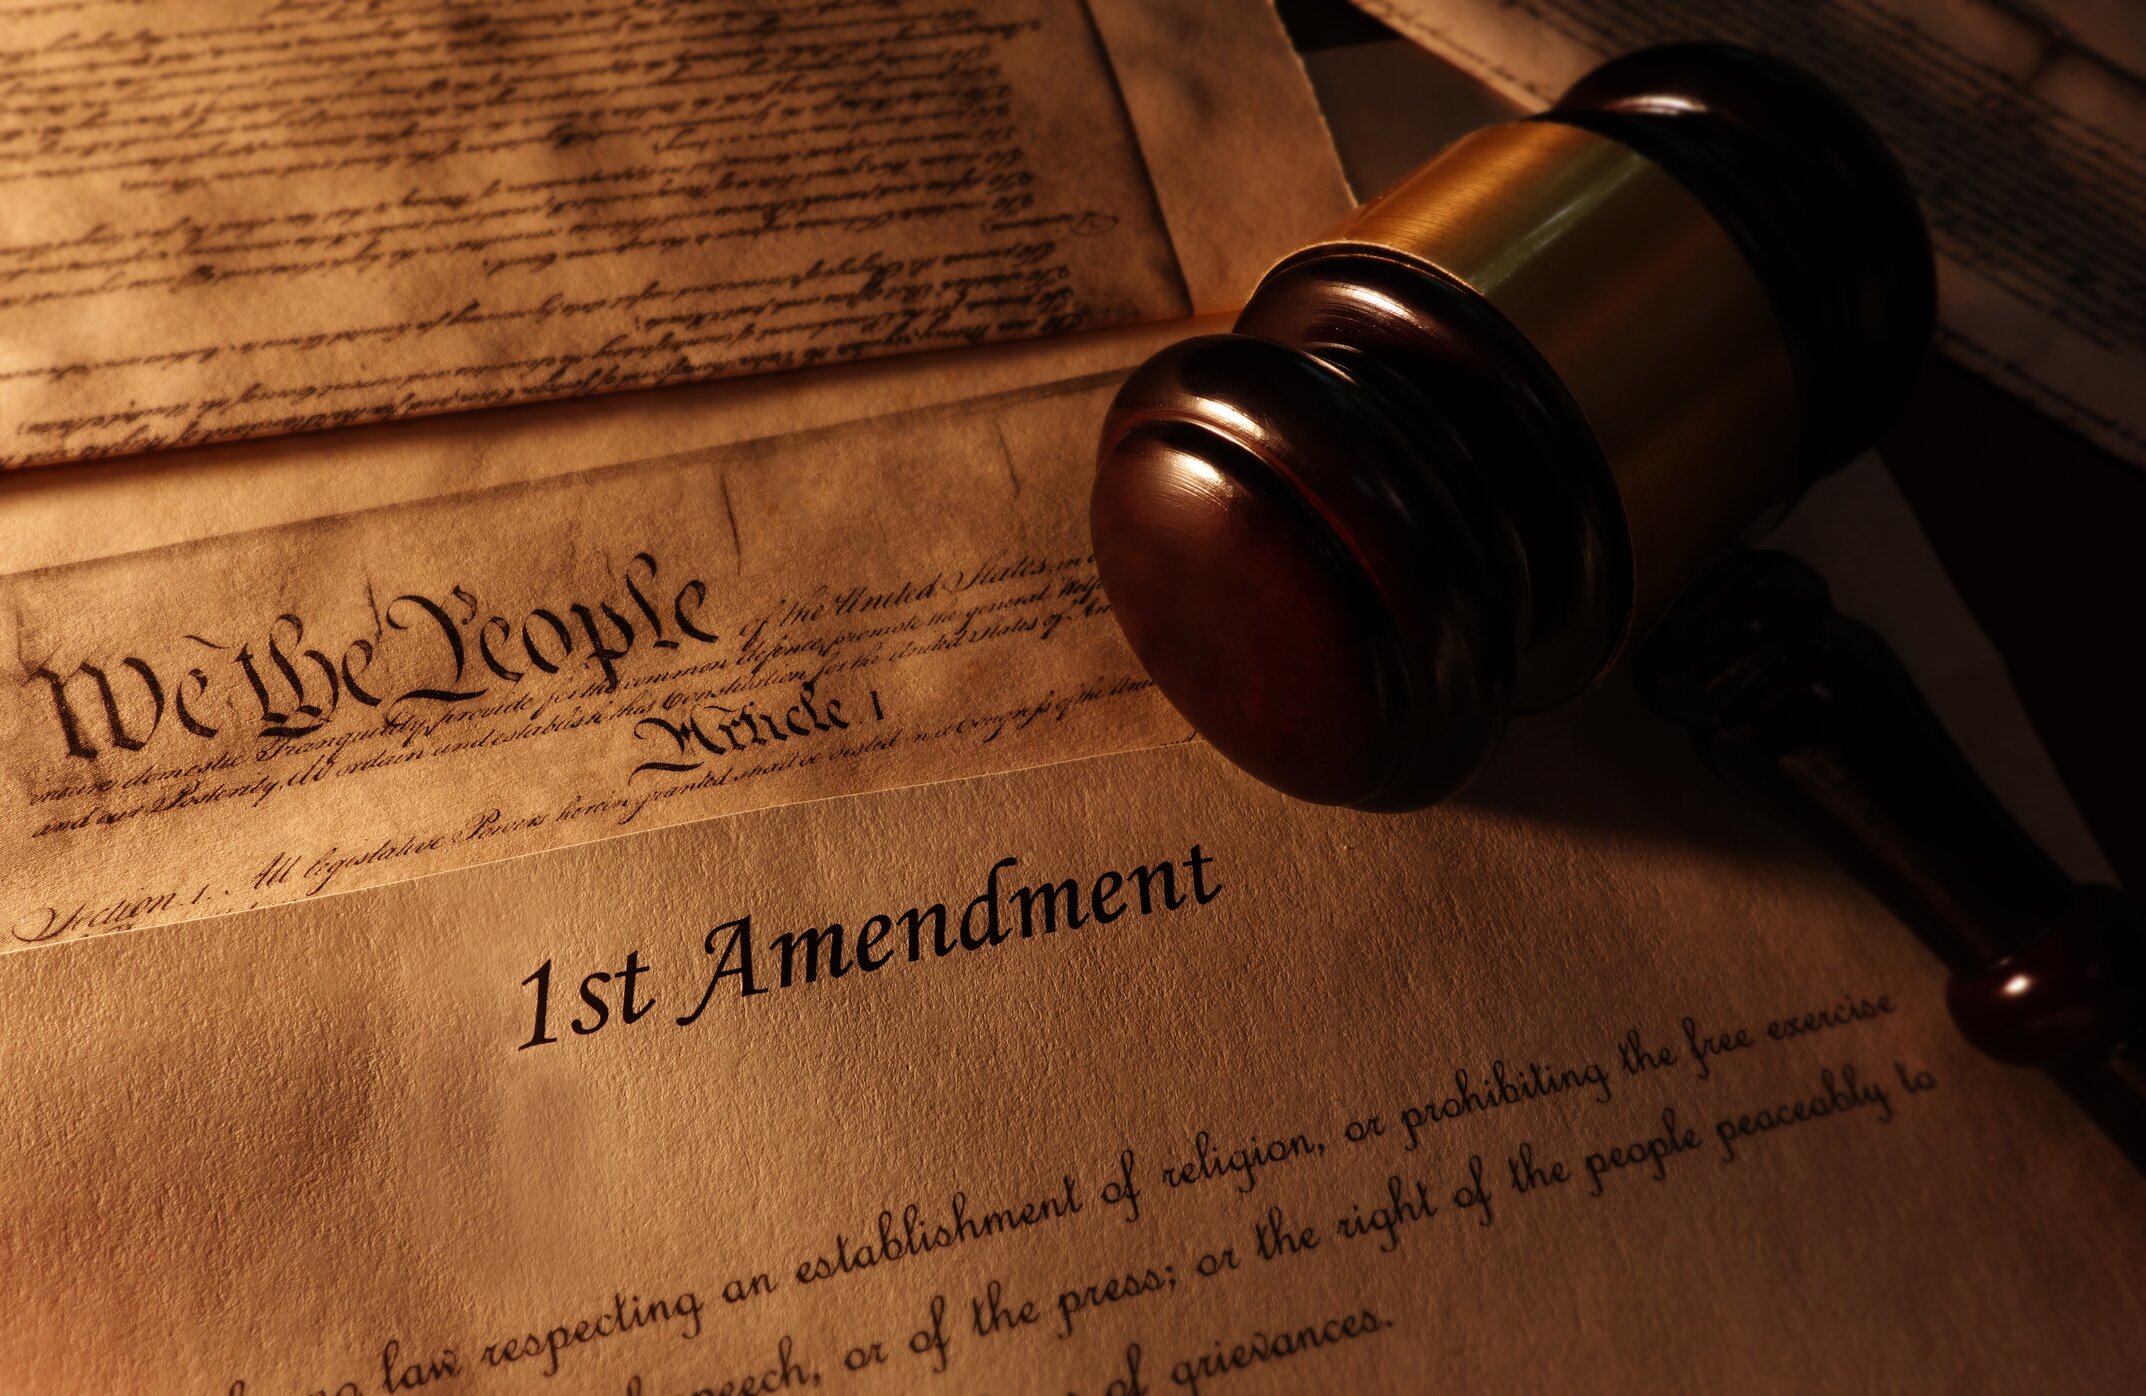 The constitution with the first amendment and a gavel